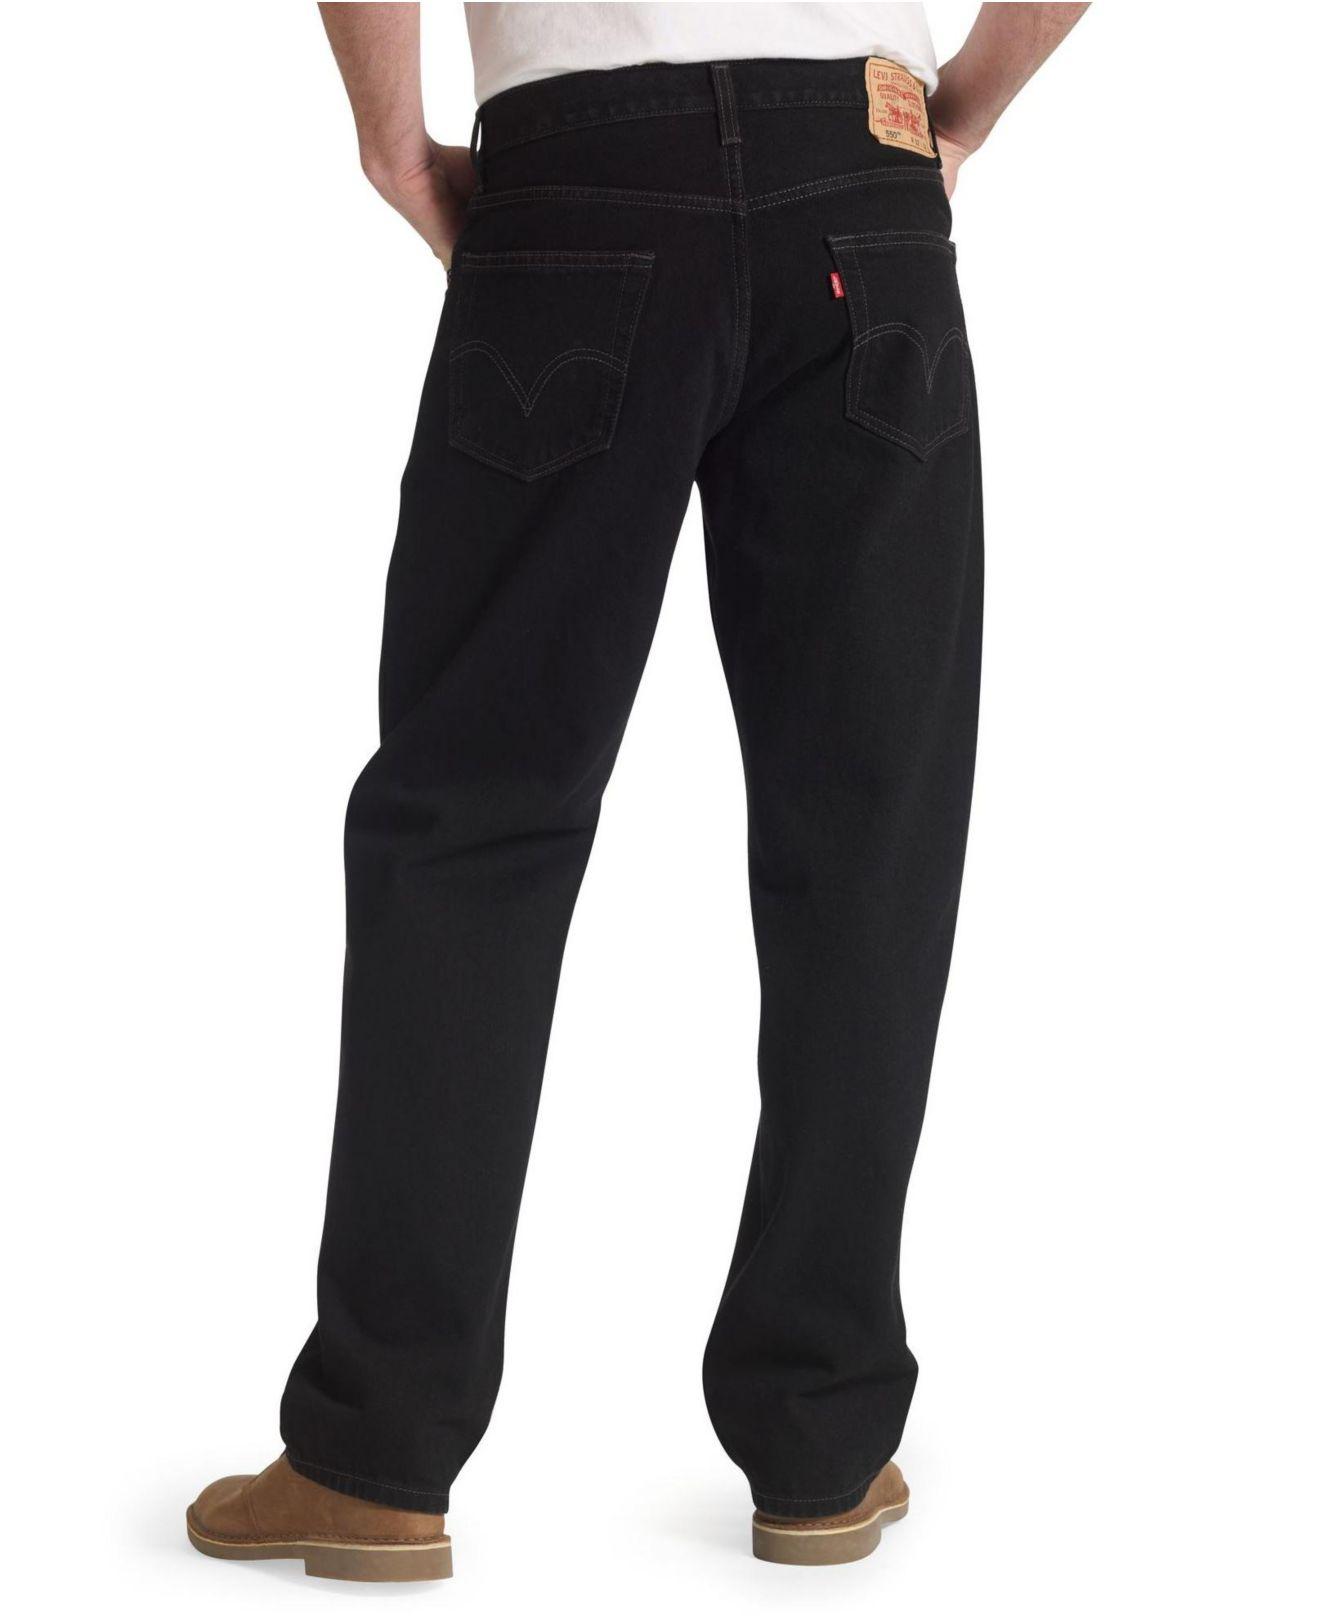 Levi's Denim 550? Relaxed Fit Jeans in Black for Men - Lyst